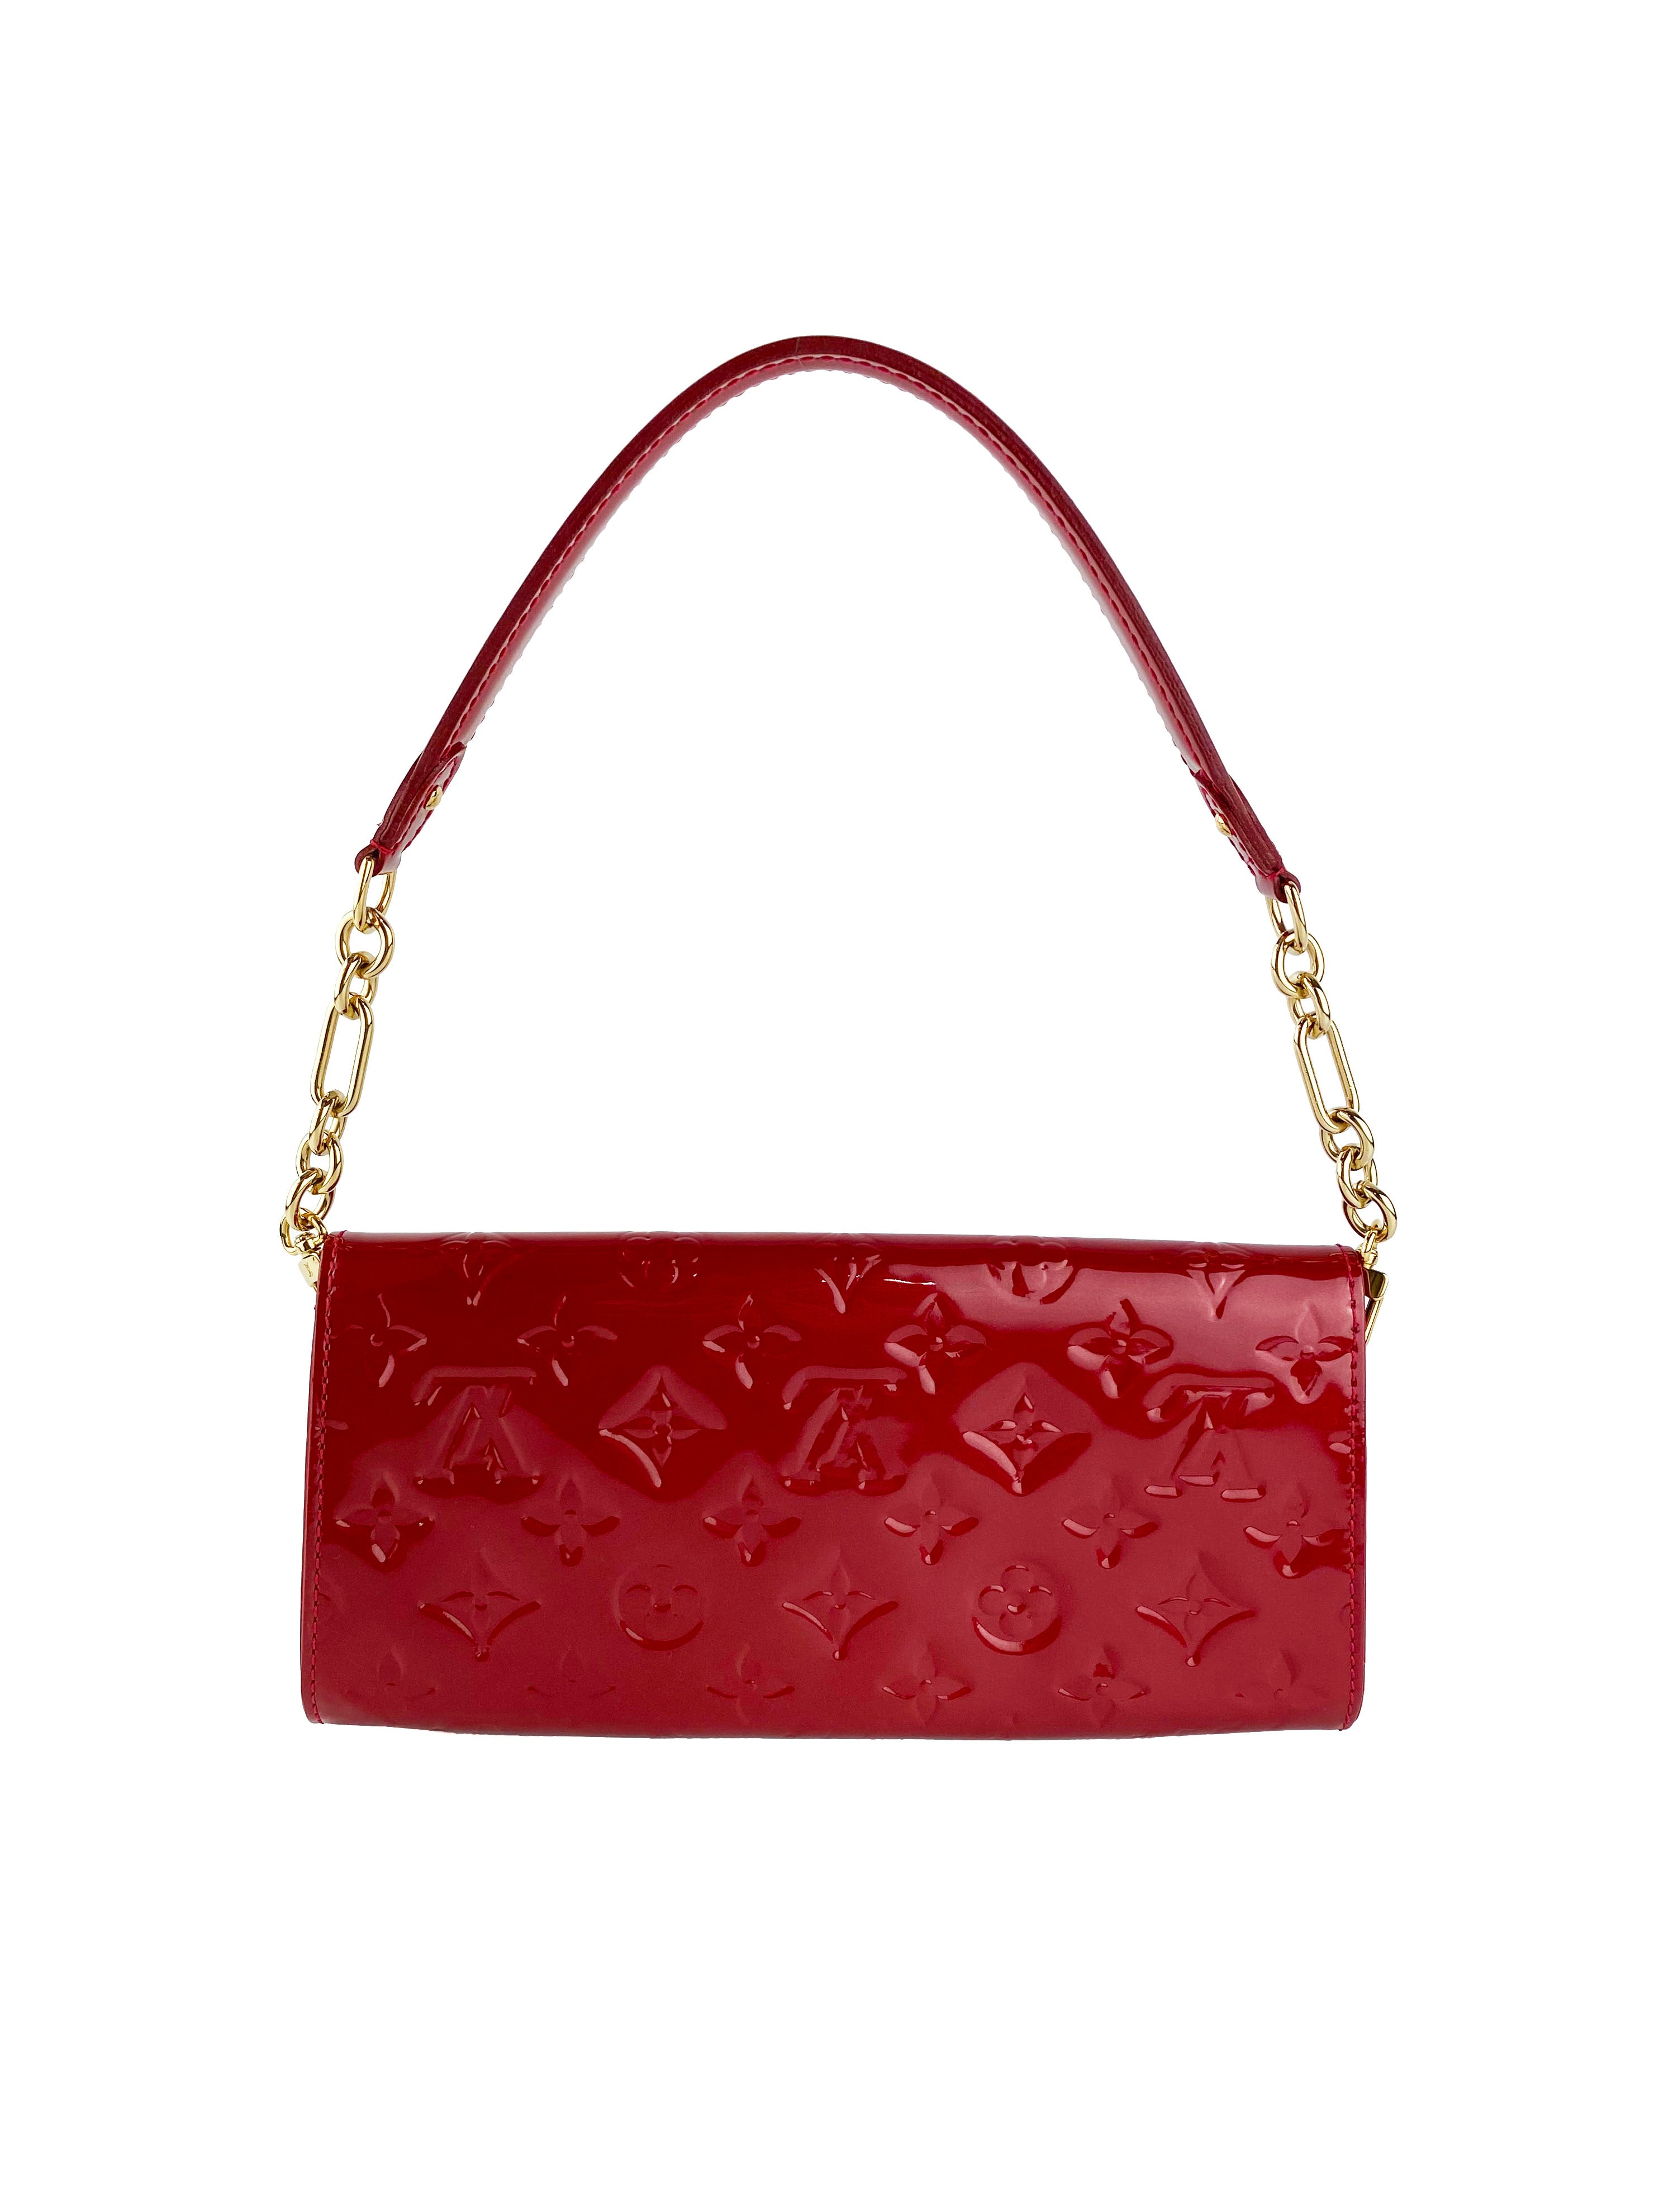 Louis Vuitton Red Vernis Leather Sunset Blvd Bag